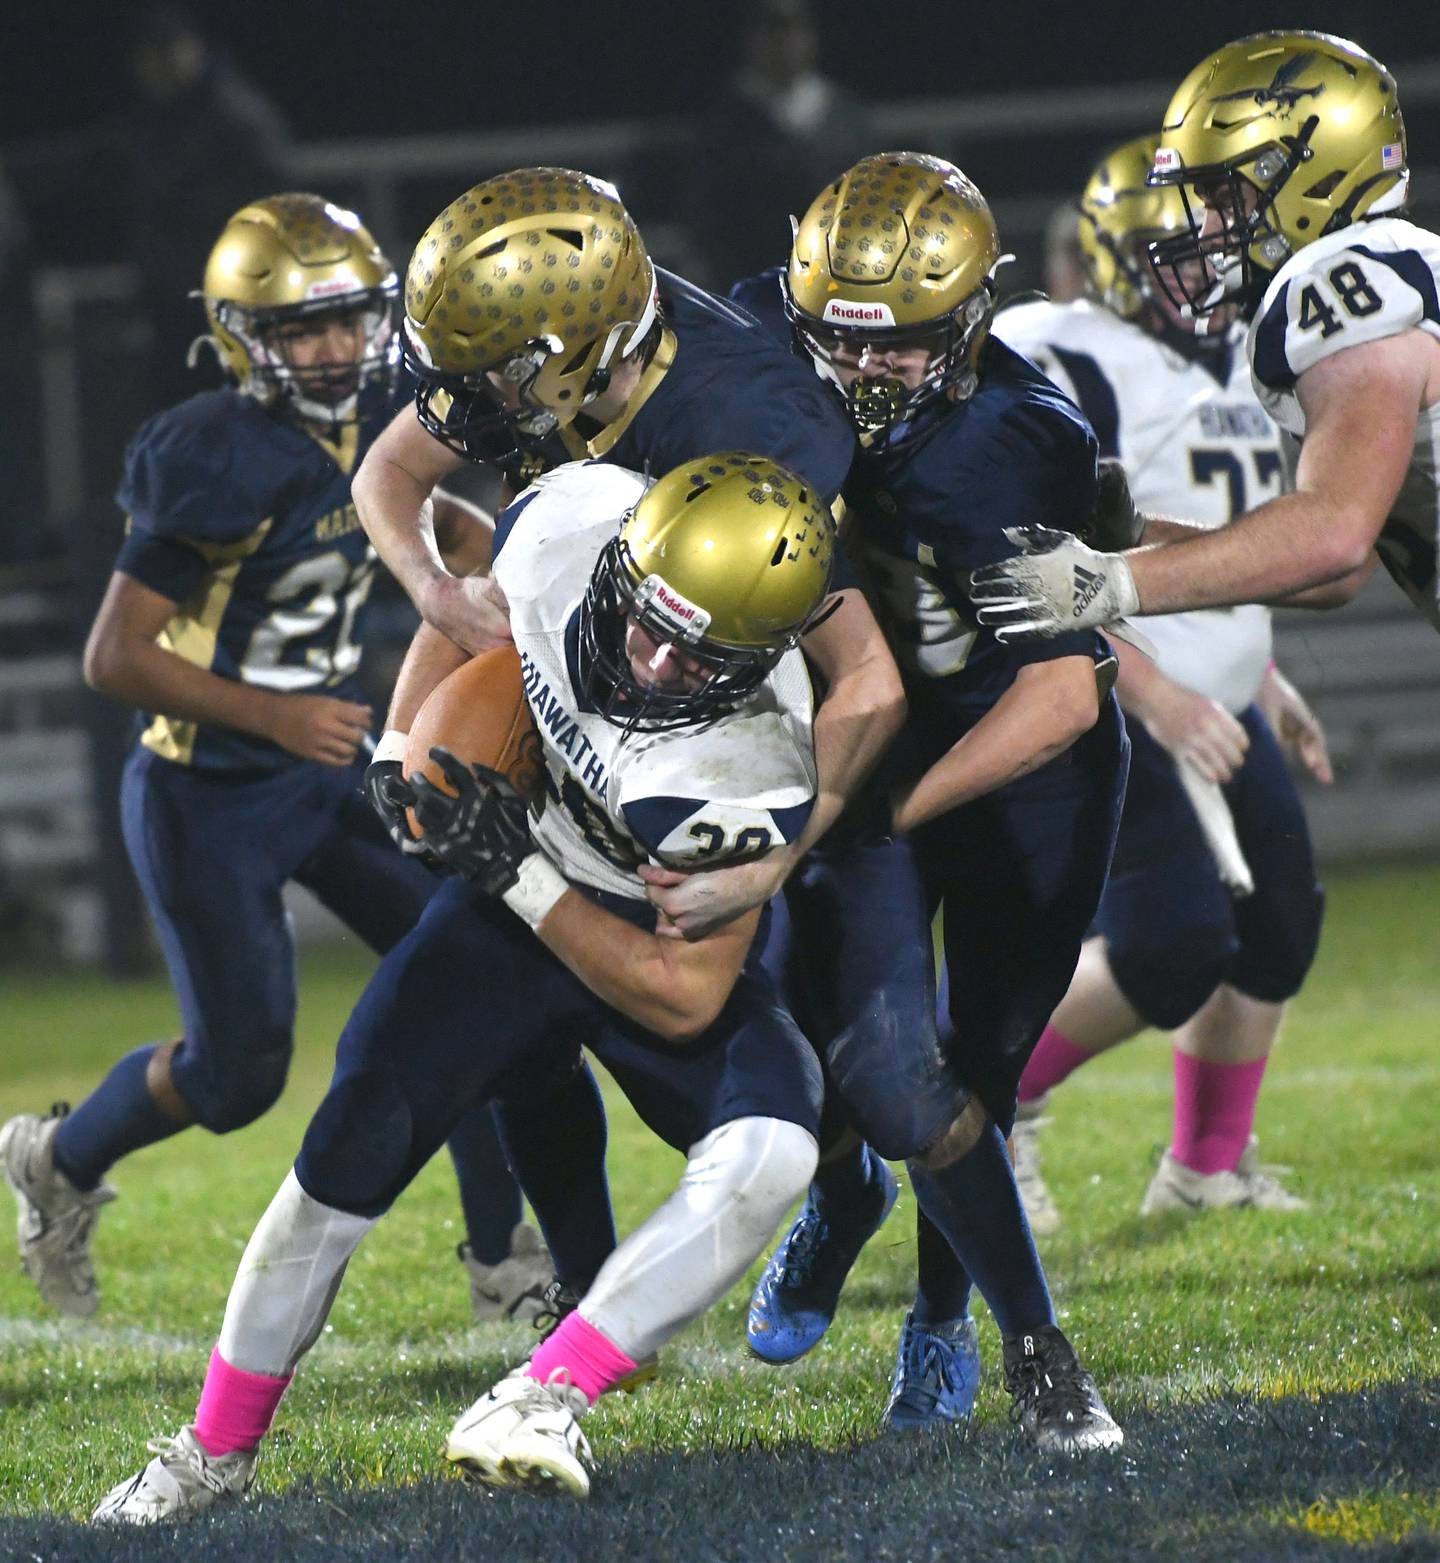 Hiawatha's Cooper Fisher is tackled by two Polo players during 8-man playoff action on Friday, Oct. 28.